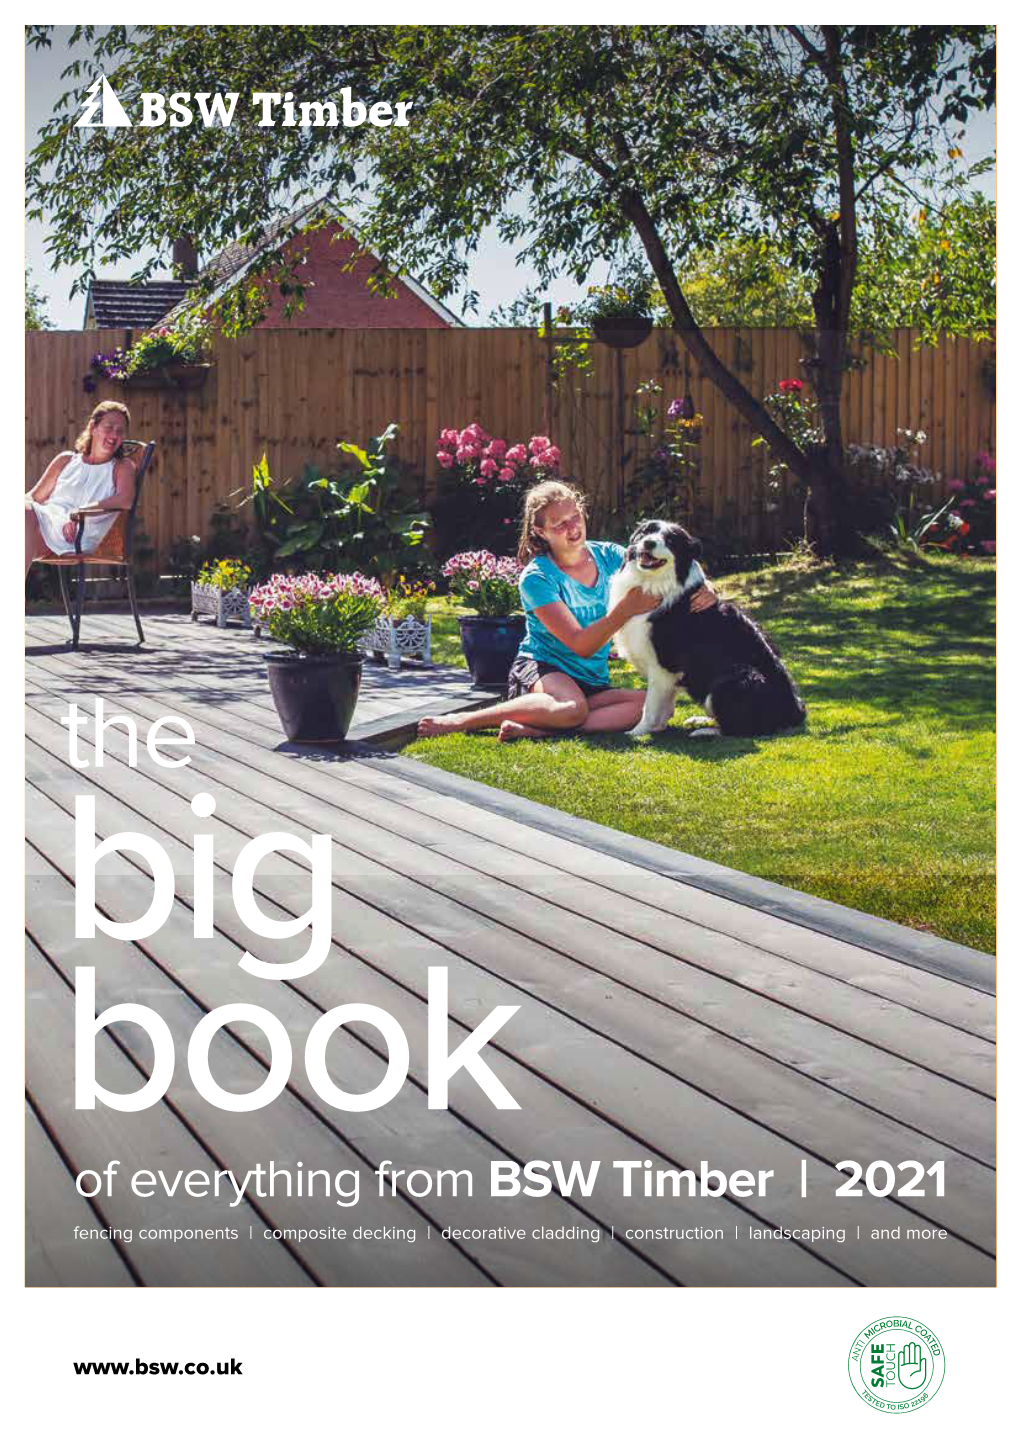 Of Everything from BSW Timber | 2021 Fencing Components | Composite Decking | Decorative Cladding | Construction | Landscaping | and More